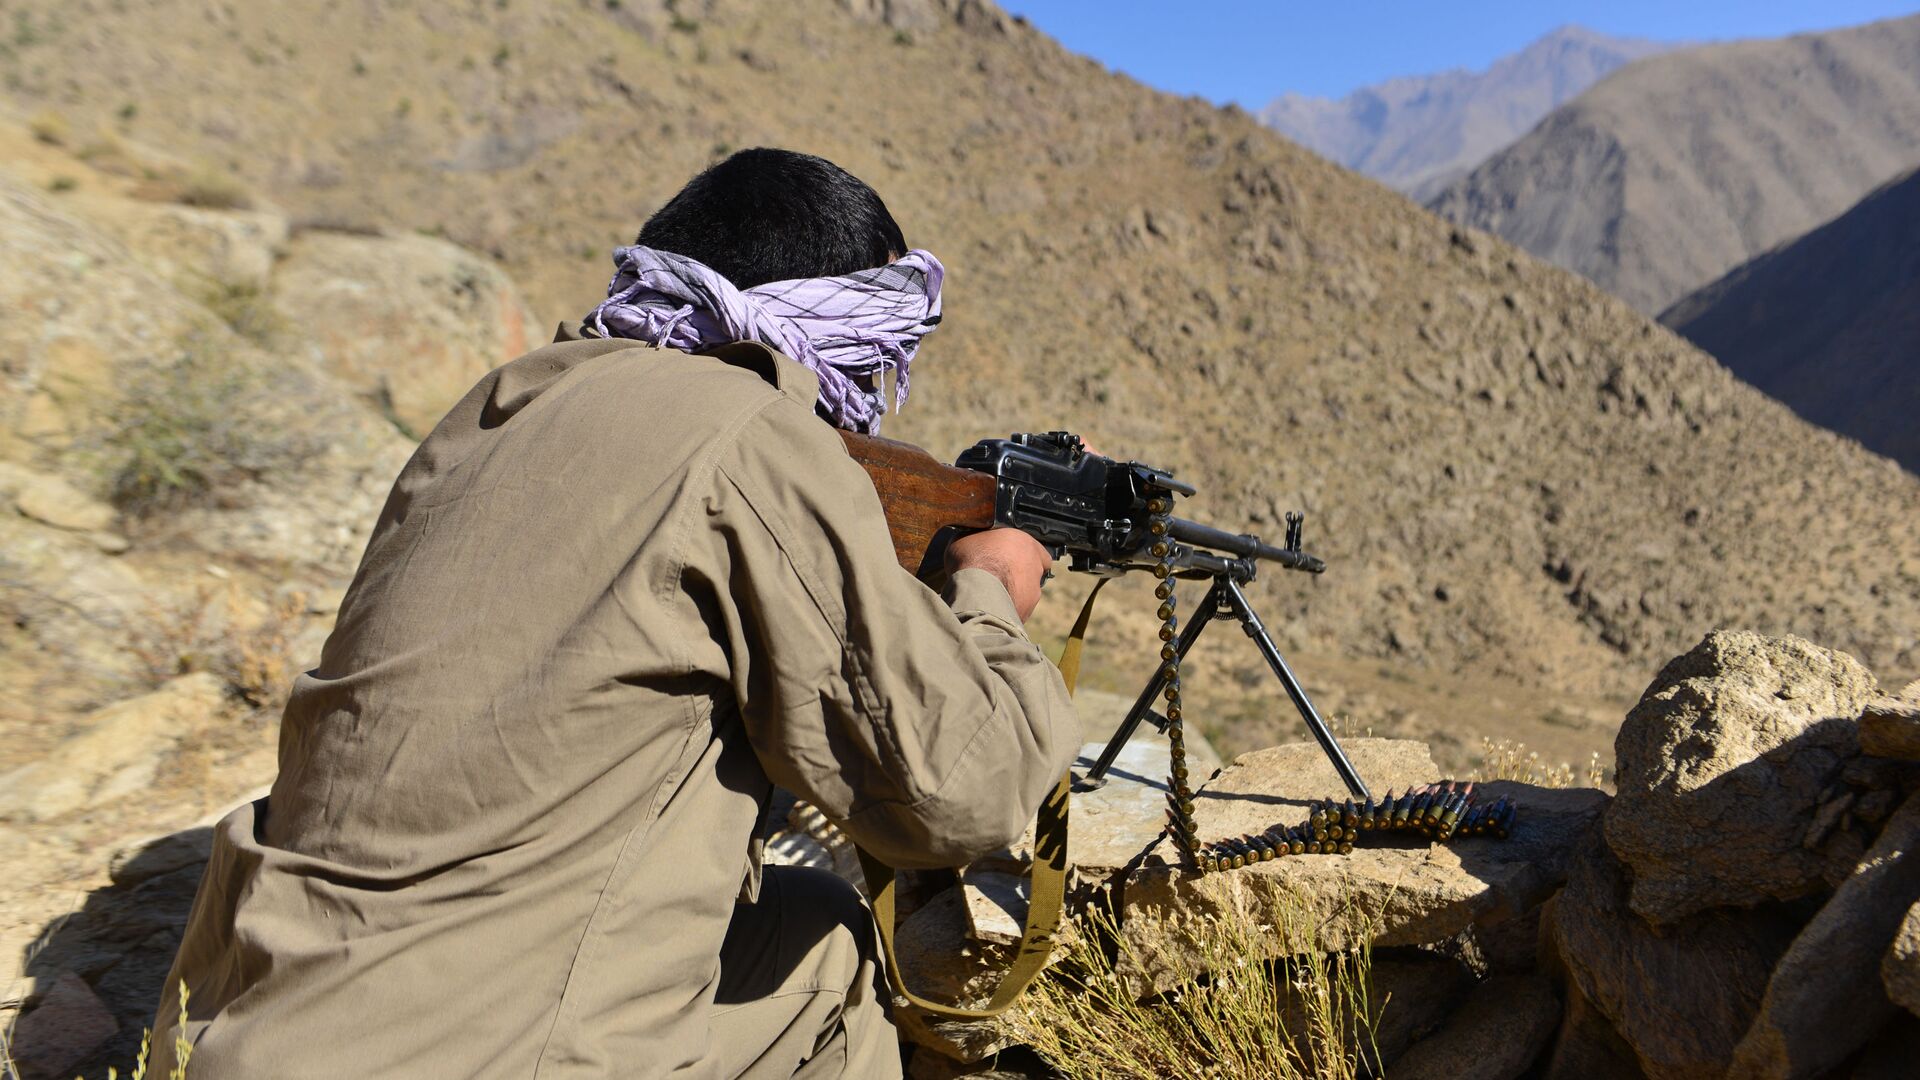 An Afghan resistance movement and anti-Taliban uprising forces personnel takes part in a military training at Malimah area of Dara district in Panjshir province on September 2, 2021 as the valley remains the last major holdout of anti-Taliban forces. - Sputnik International, 1920, 03.09.2021